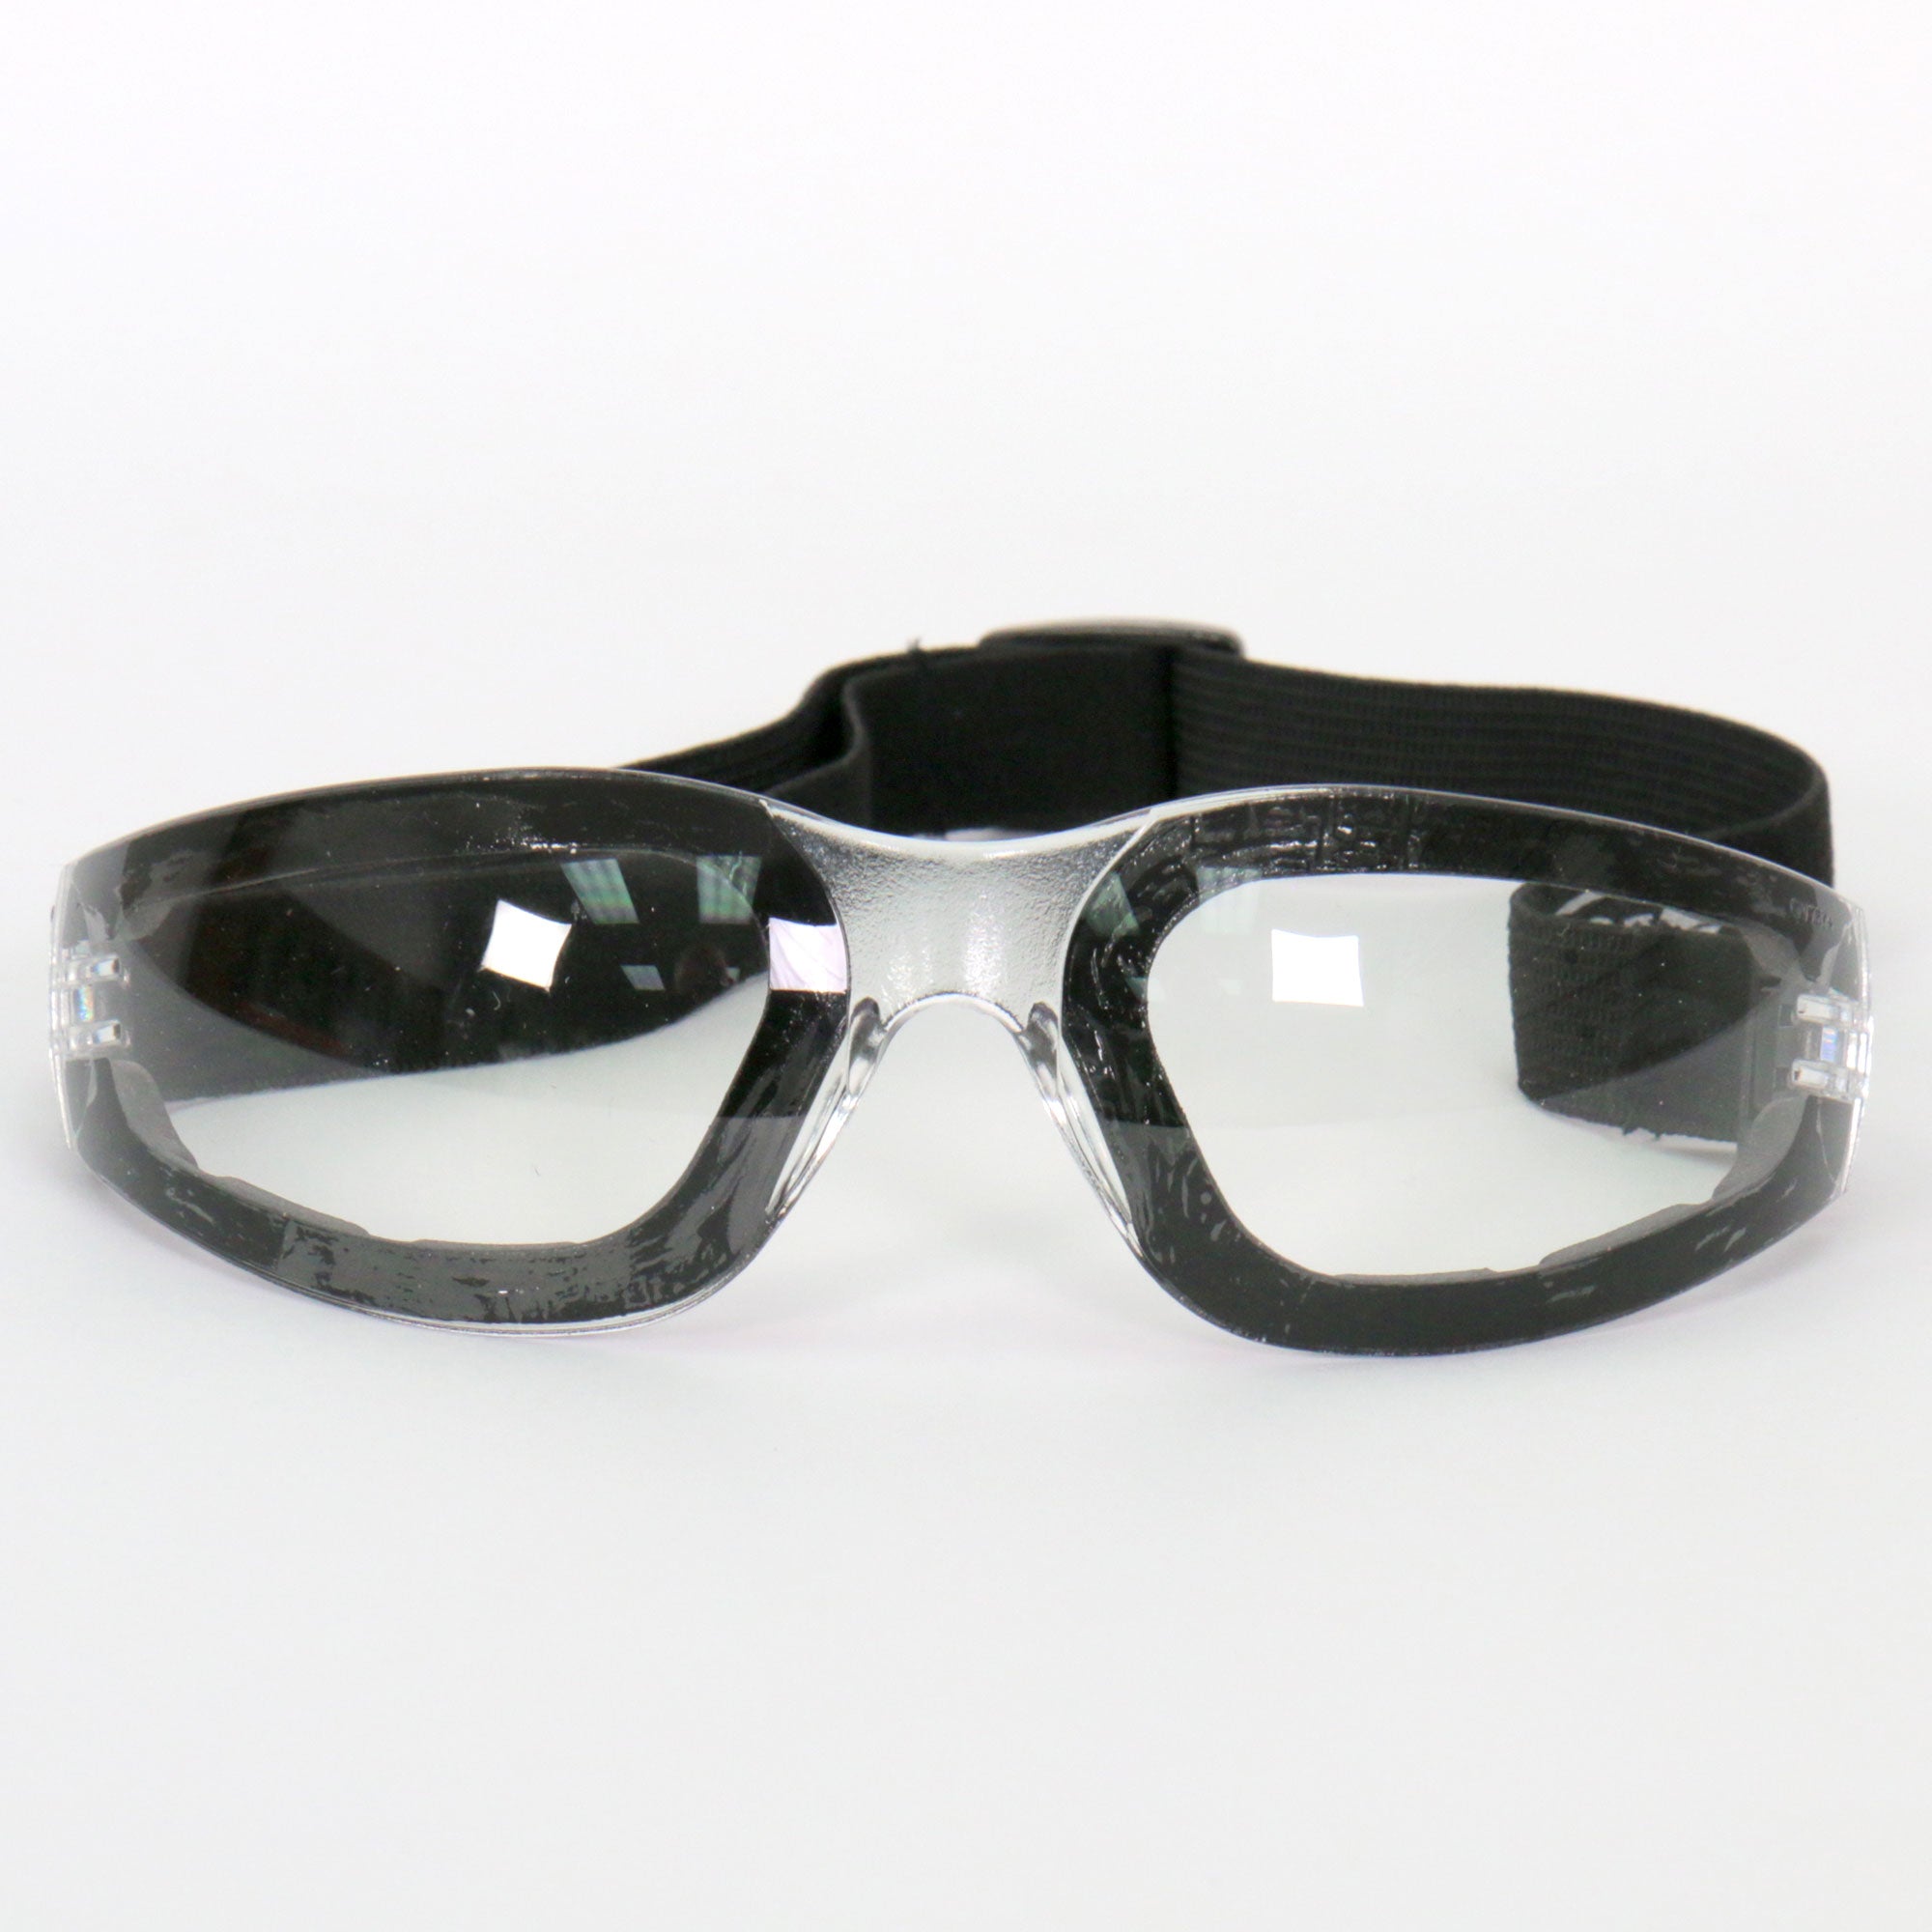 Hot Leather Safety Sunglasses Goggles with Clear Lenses